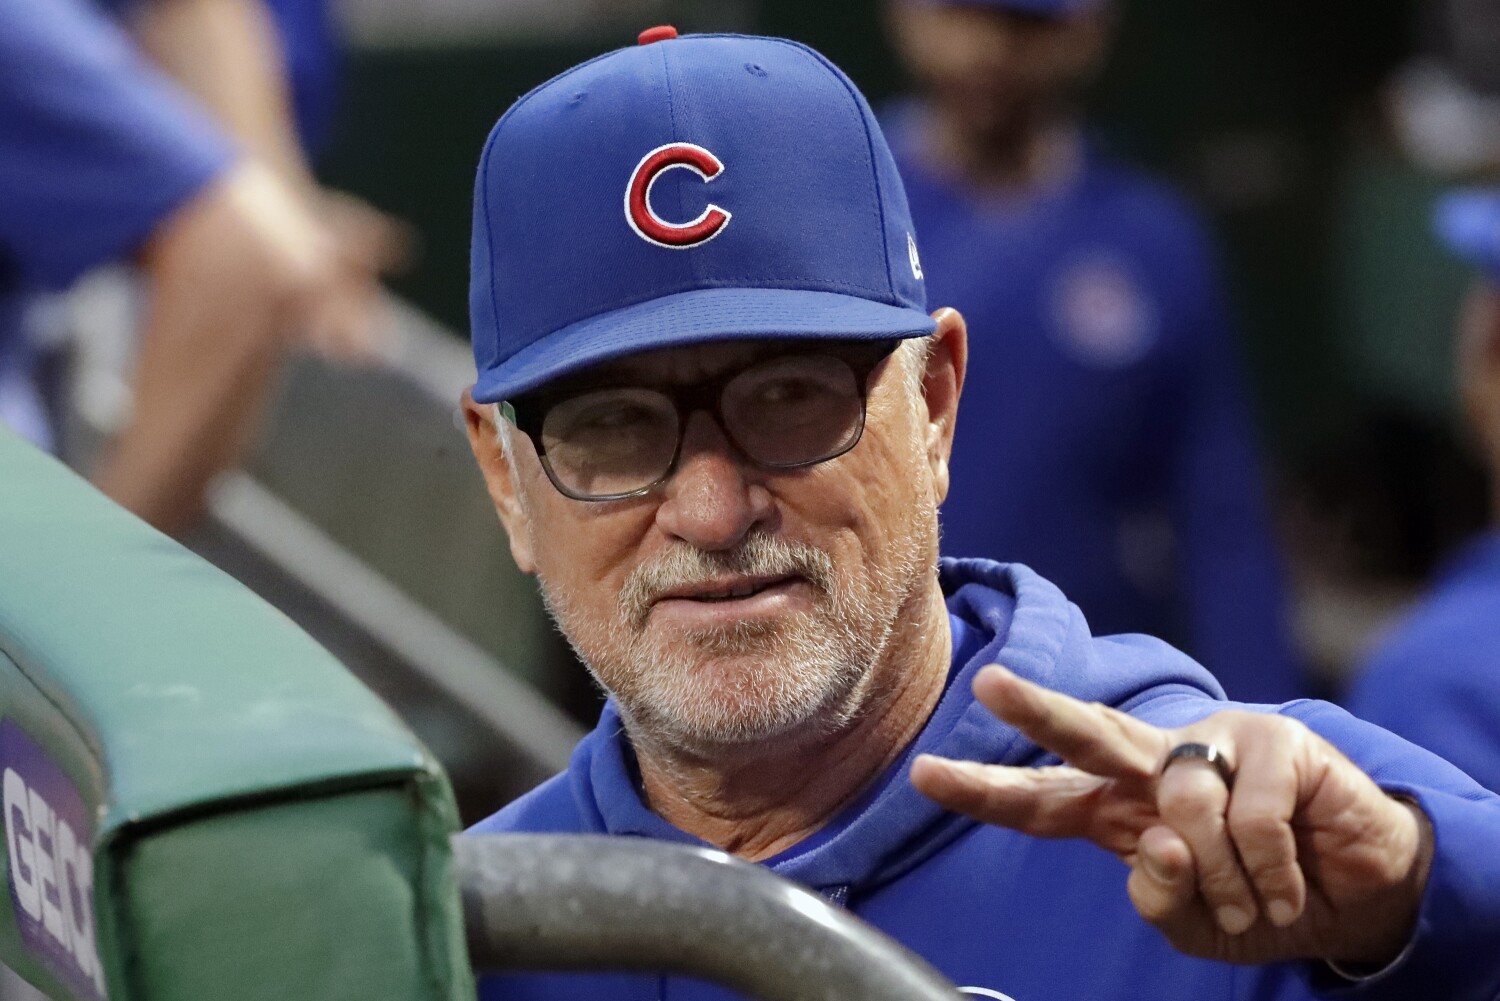 Plaschke: Hiring calm, cerebral Joe Maddon as manager was ideal for Angels team in turmoil